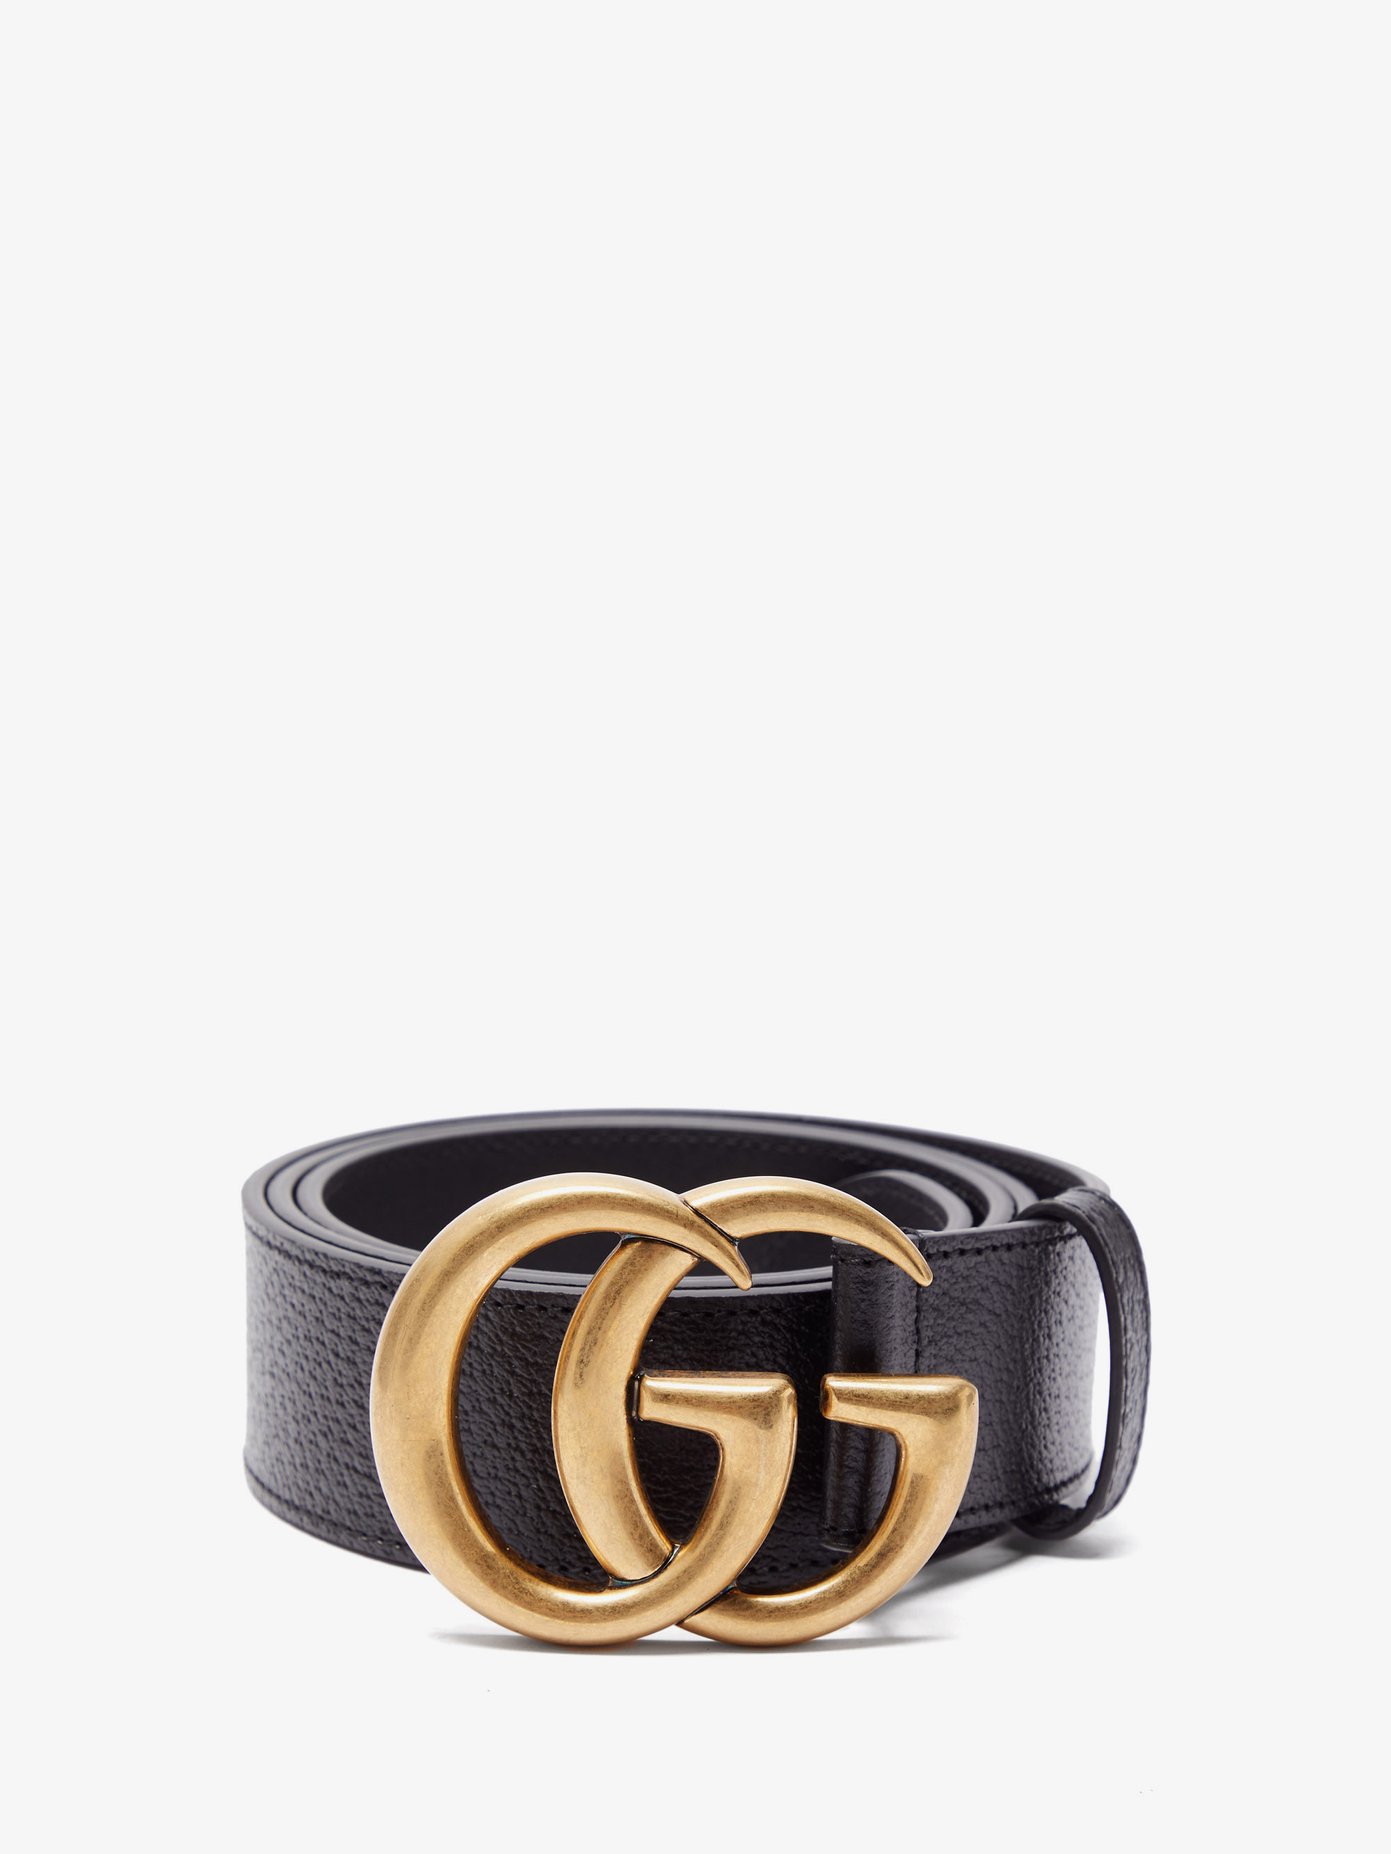 belt from gucci